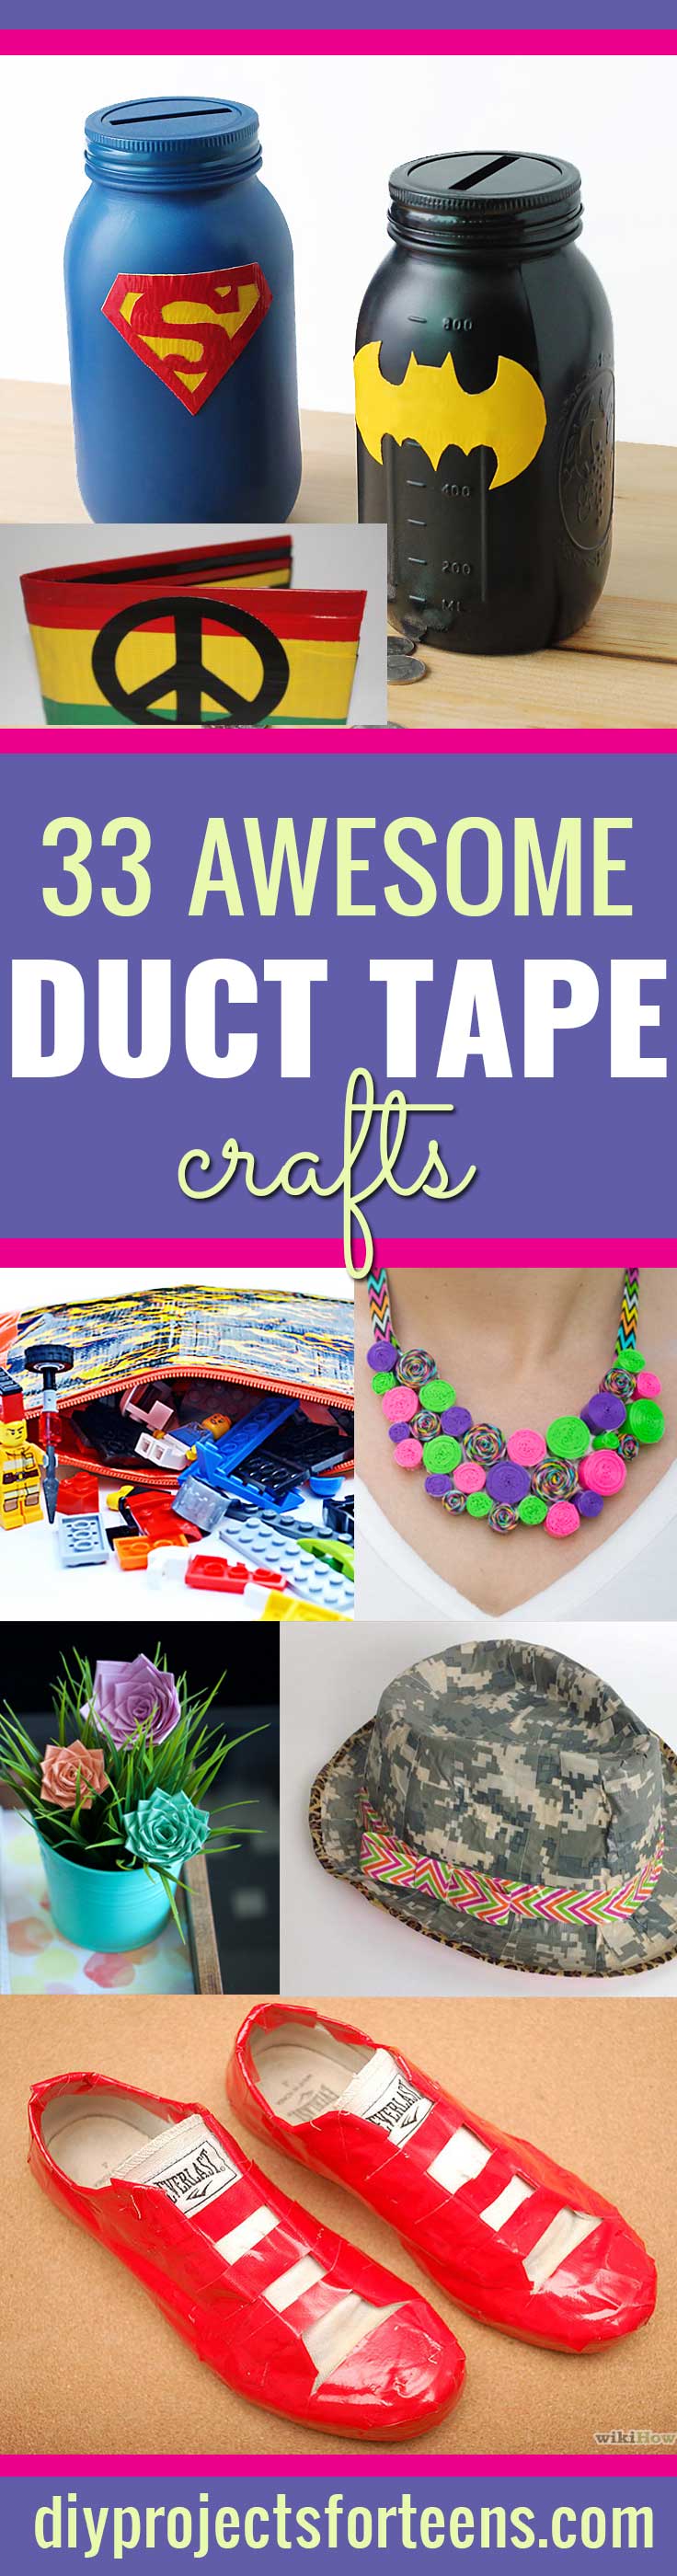 Duct Tape Crafts Ideas for DIY Home Decor, Fashion and Accessories | Cool DIY Projects for Teens, Tweens and Teenagers #teencrafts #kidscrafts #ducttape #cheapcrafts /